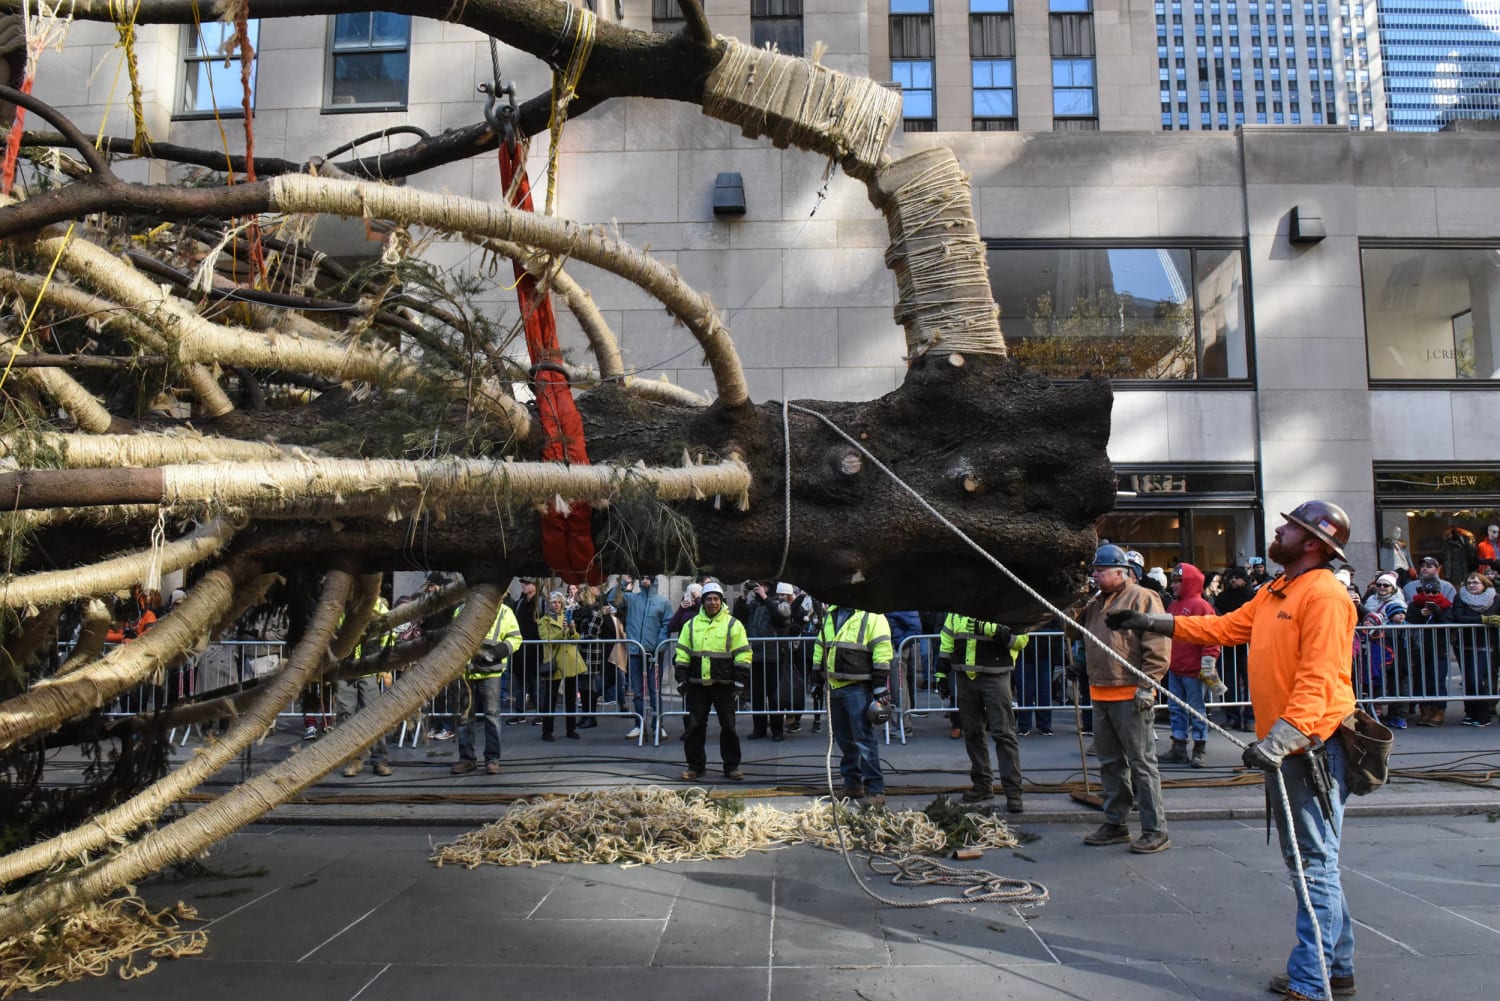 The Rockefeller Center Christmas Tree: From backyard giant to Midtown jewel